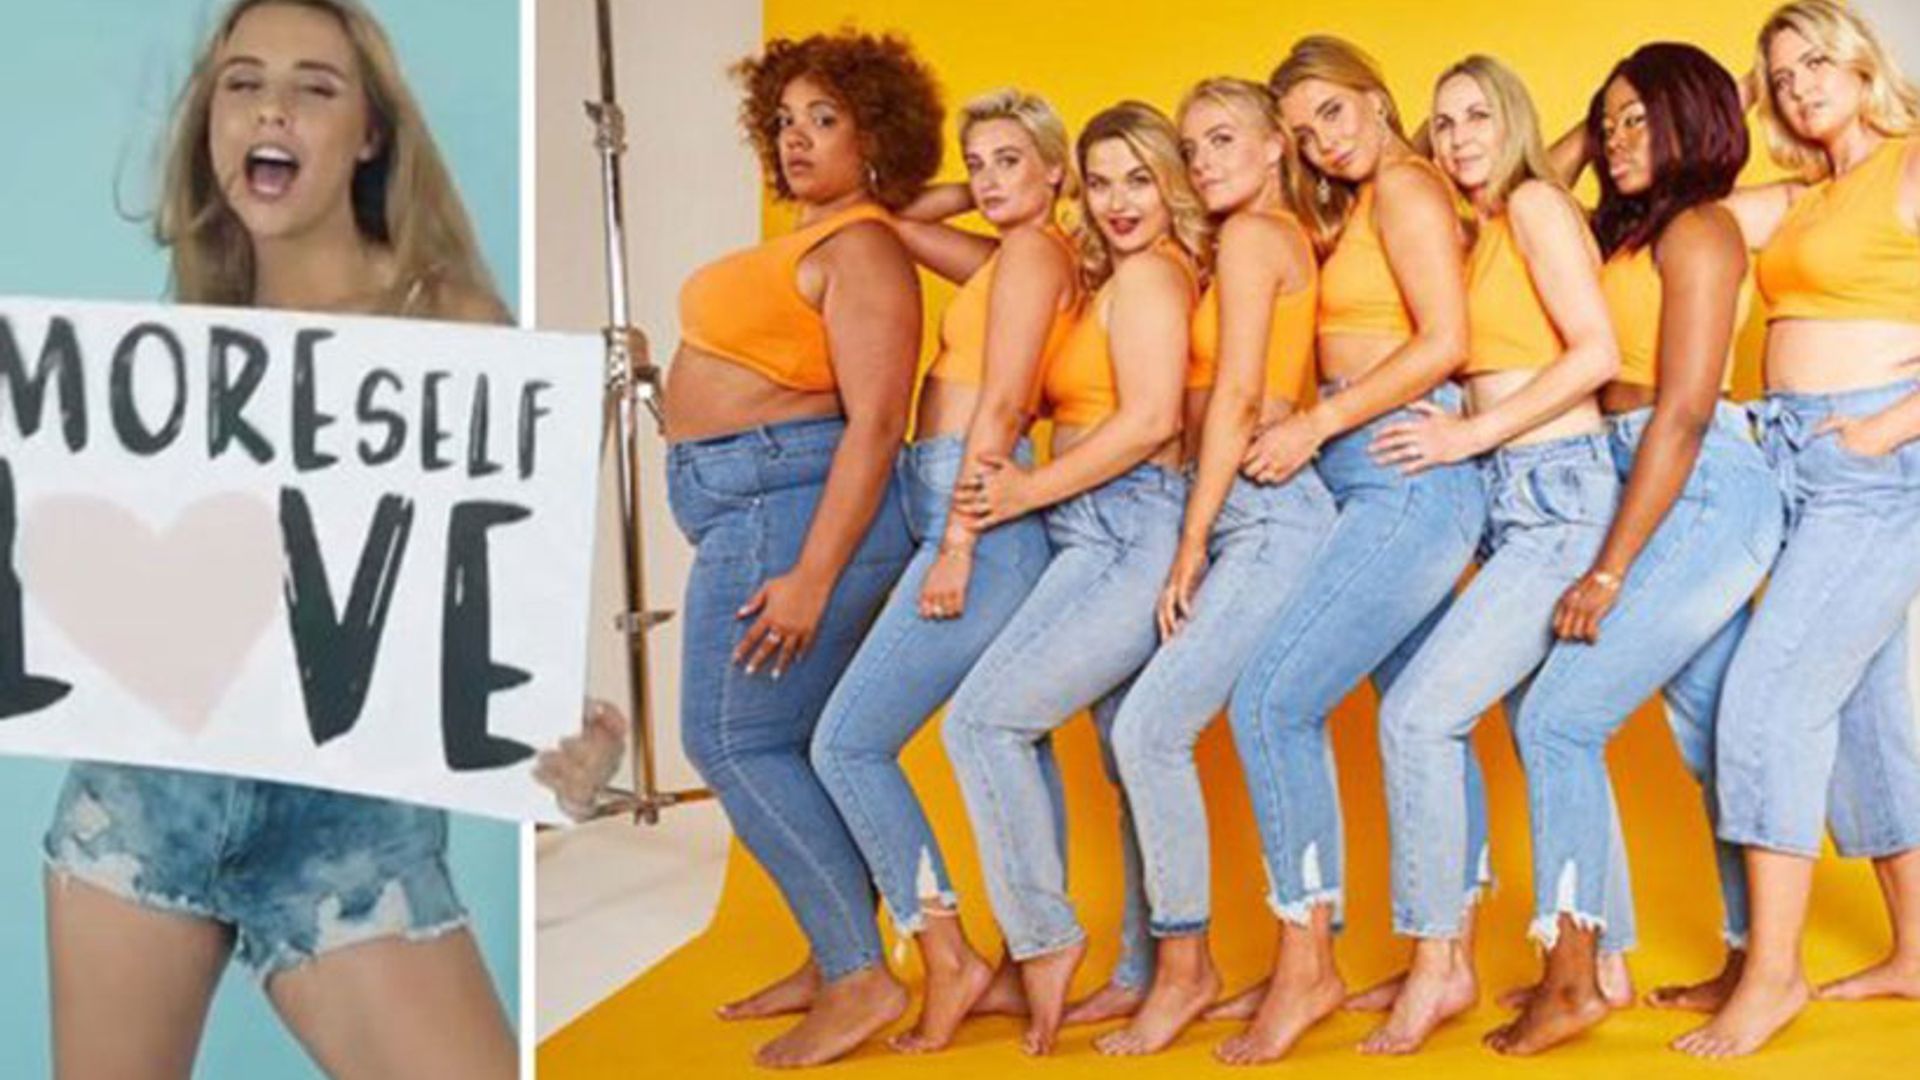 Clothing brand criticised for using size 12 model as star of body confidence campaign